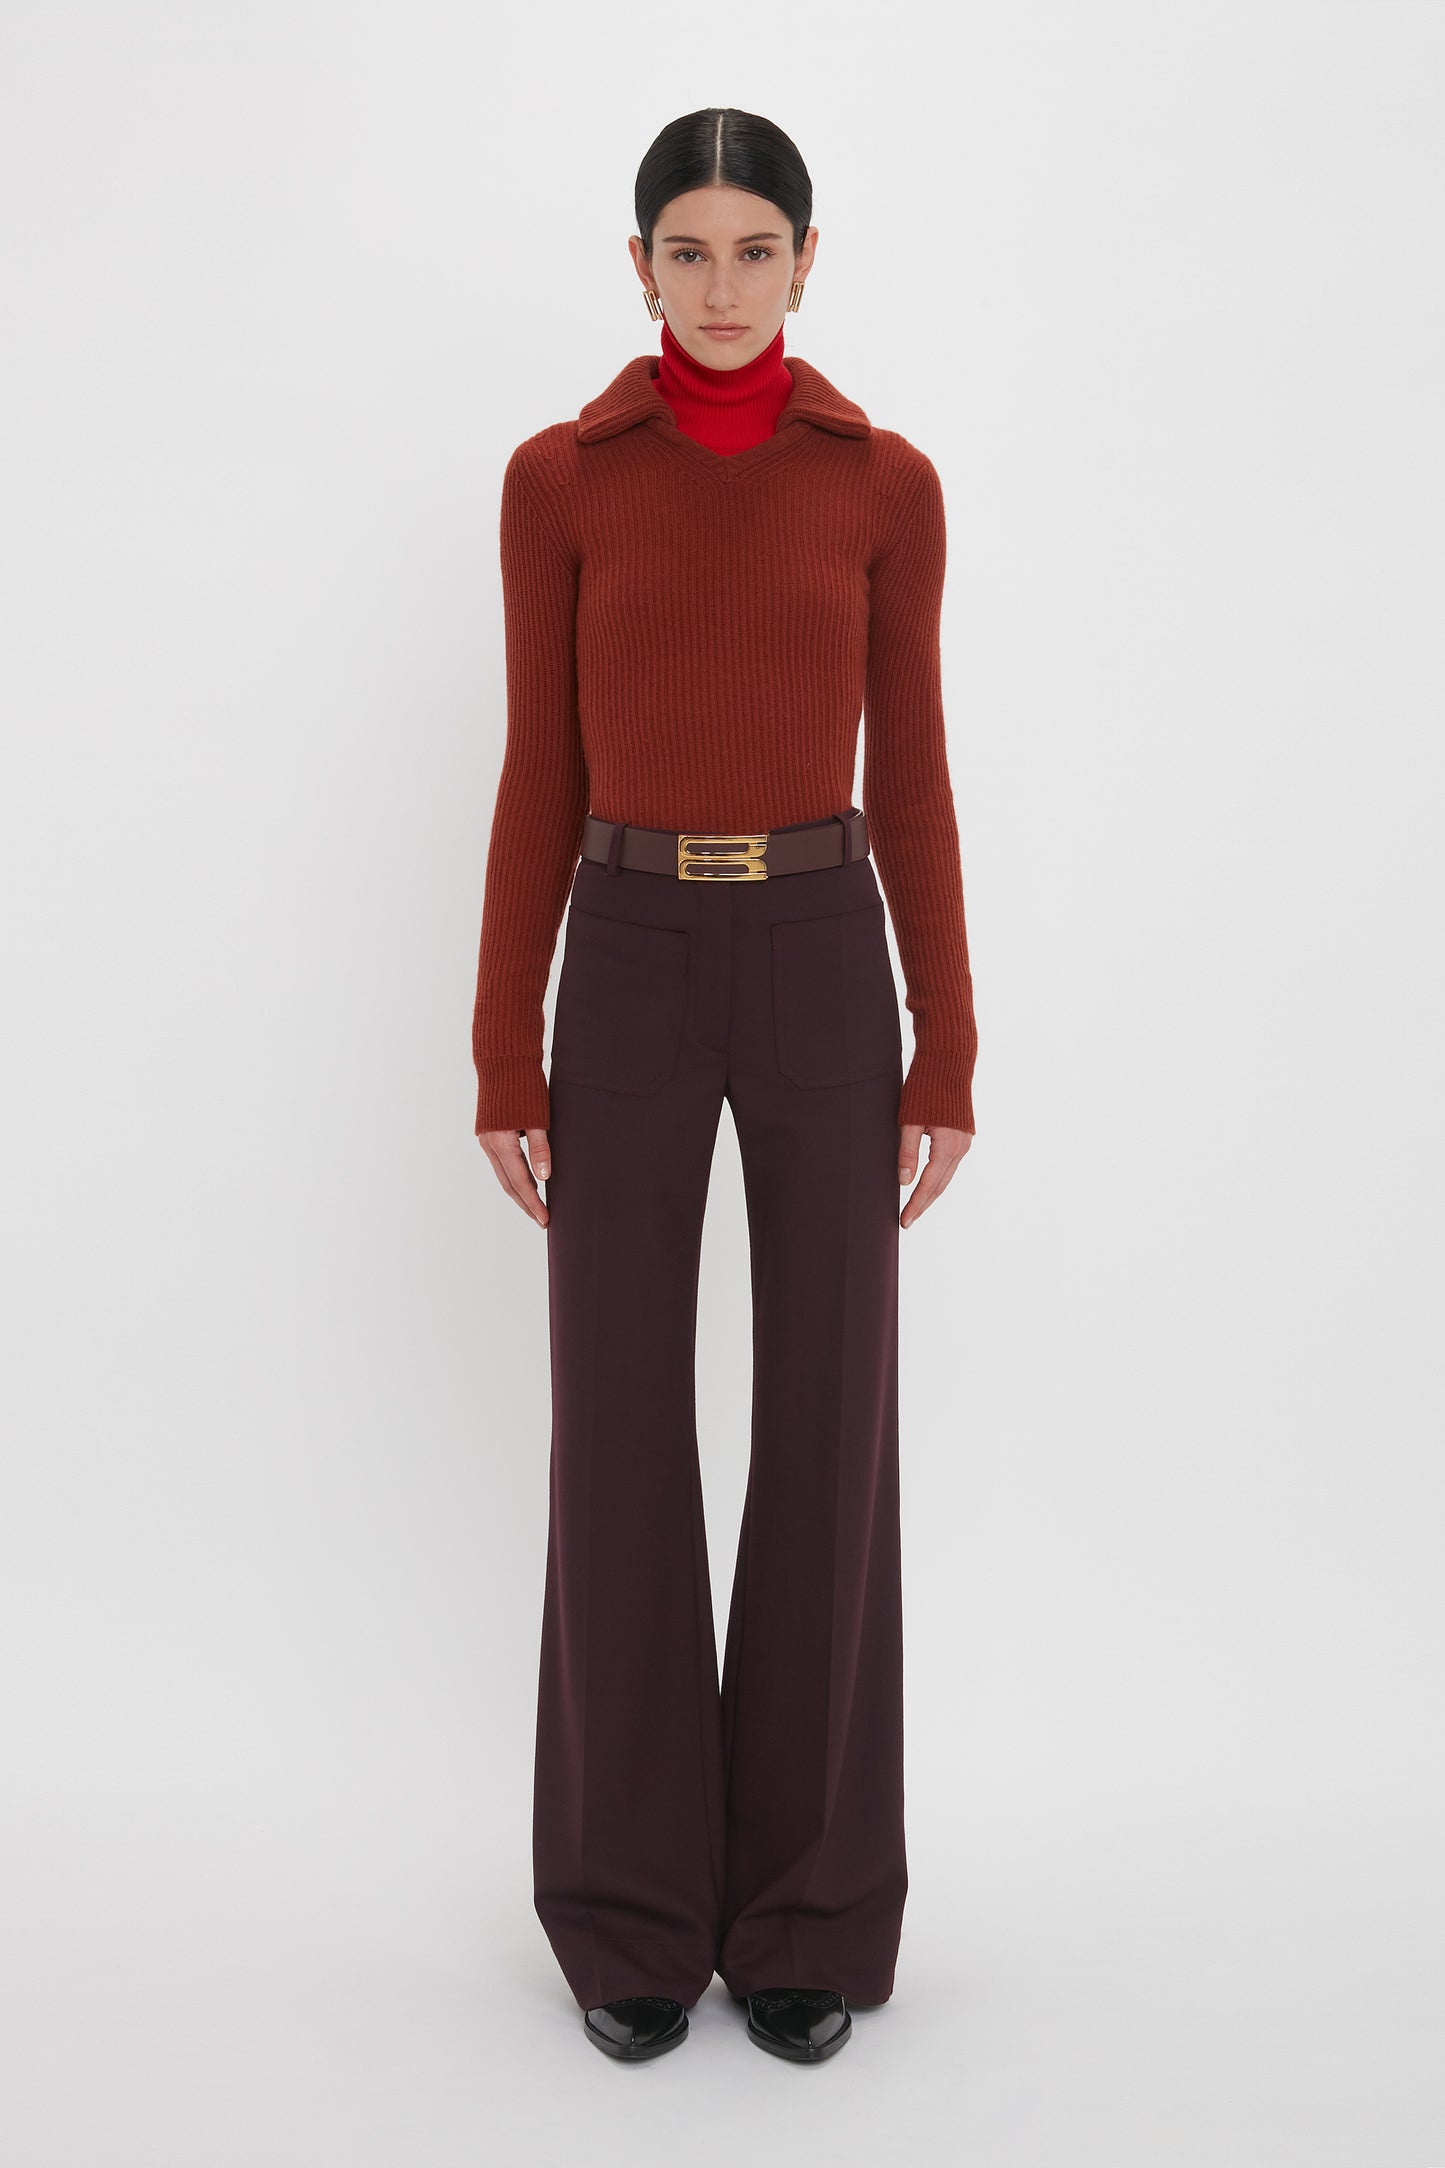 A person wearing a red turtleneck under a rust-colored recycled wool sweater paired with high-waisted deep mahogany Alina Trousers by Victoria Beckham and a belt. The person stands facing forward against a plain white background.